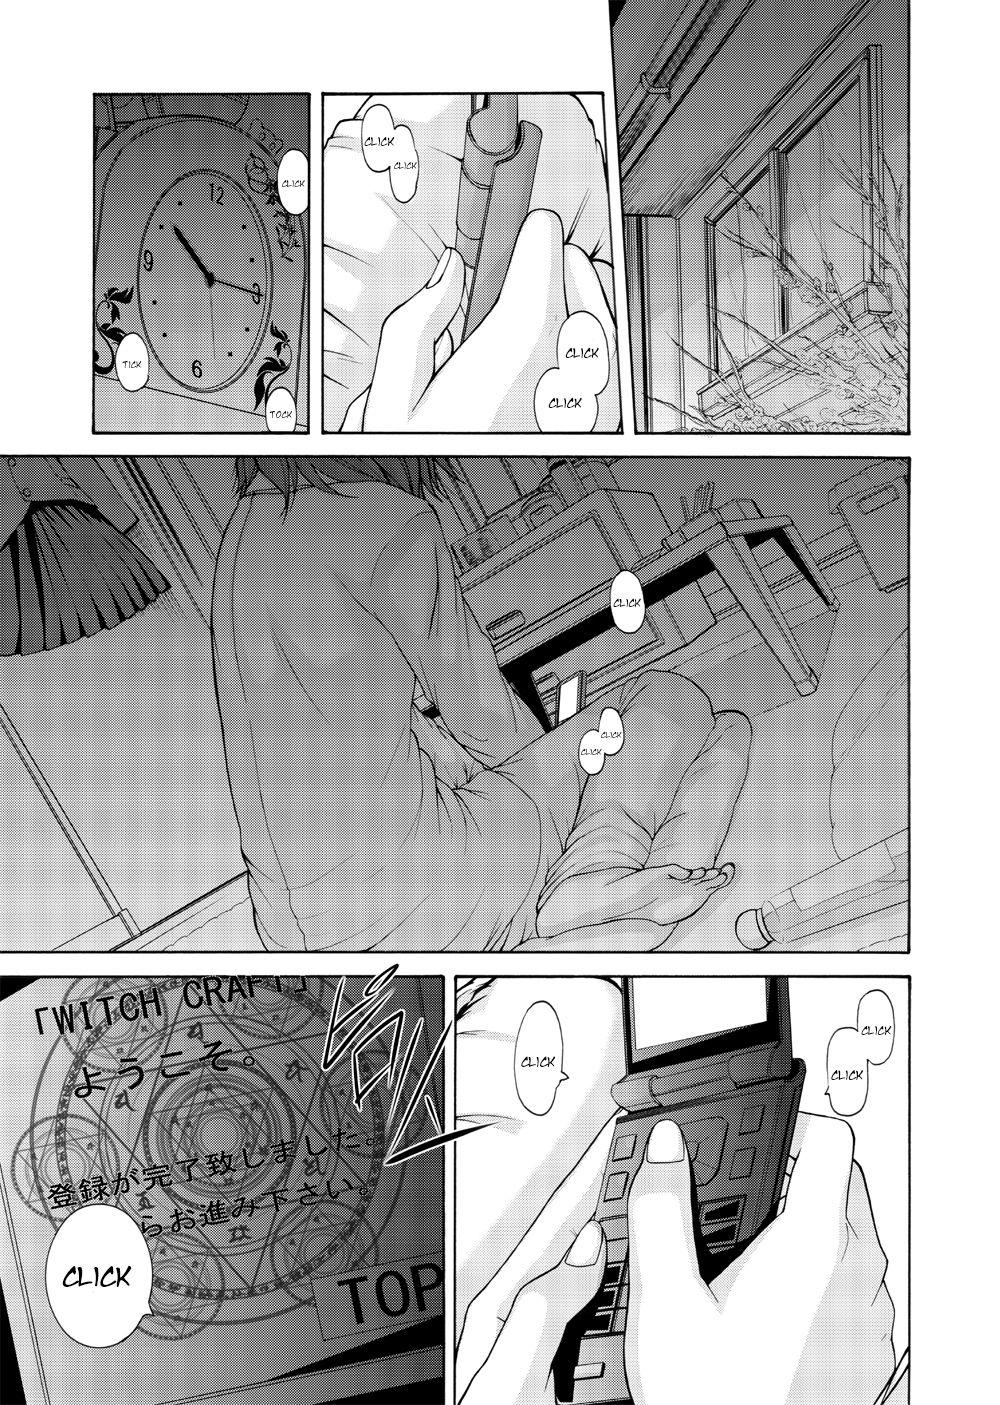 Couples [remora works] FUTACOLO CO -WITCH CRAFT- feat. Karasu VOL. 003 [English] [rinfue] Paja - Page 2